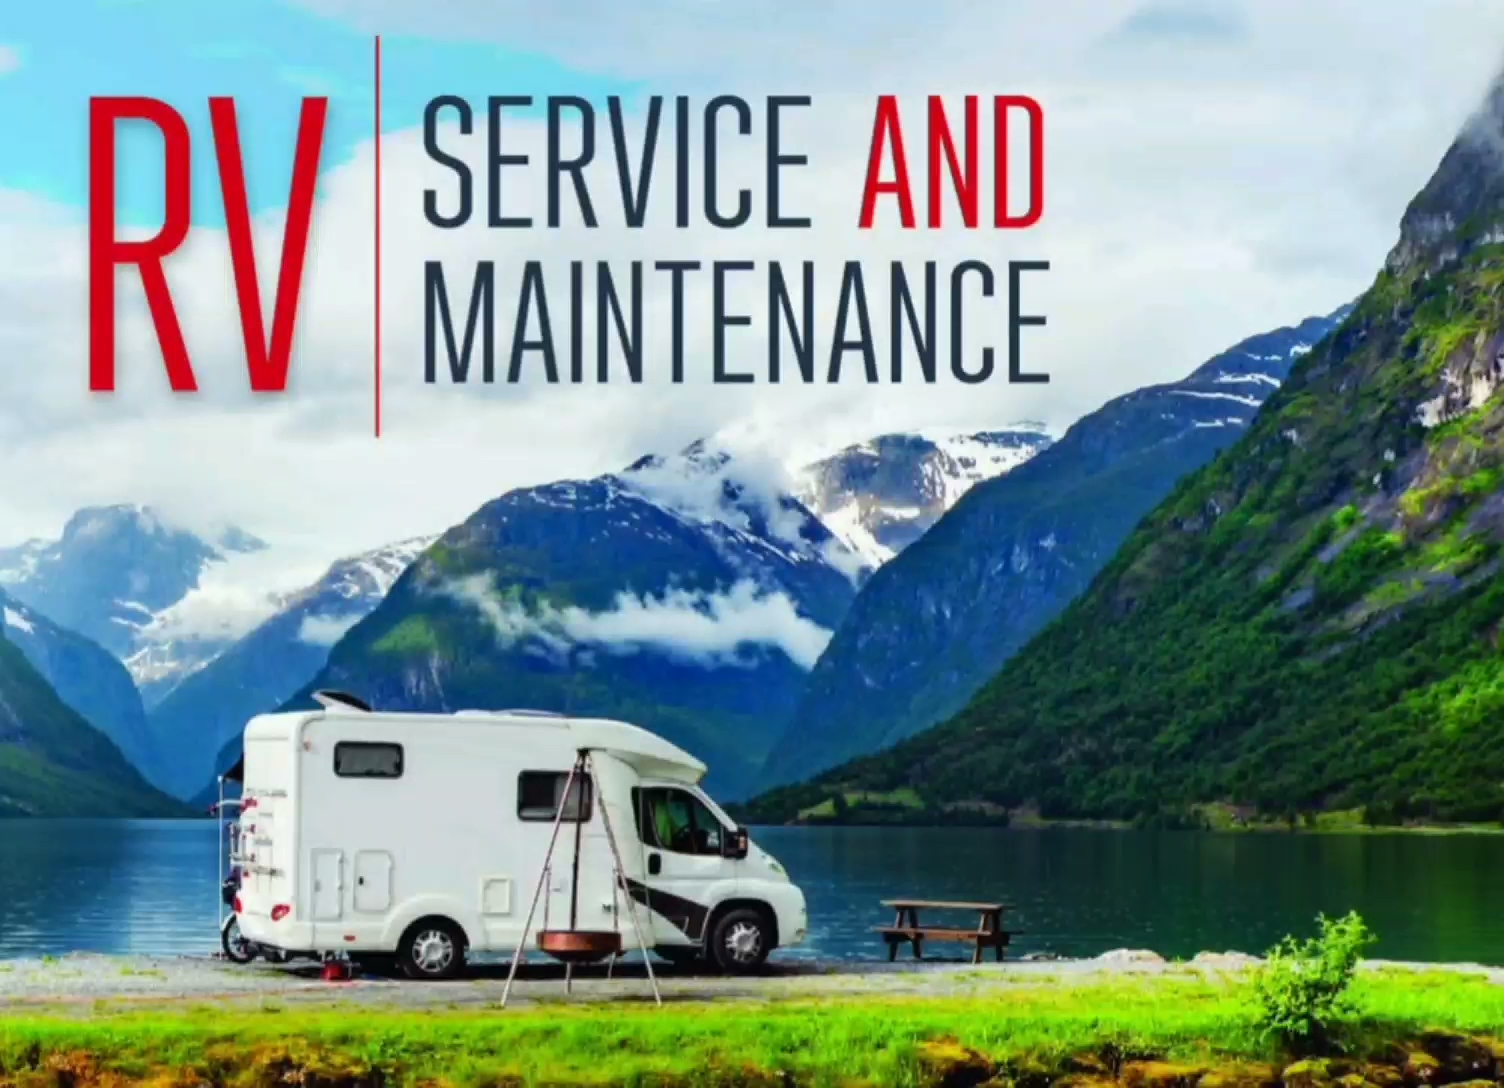 518 Mobile RV Repair 32 Barnaby Rd, West Chazy New York 12992